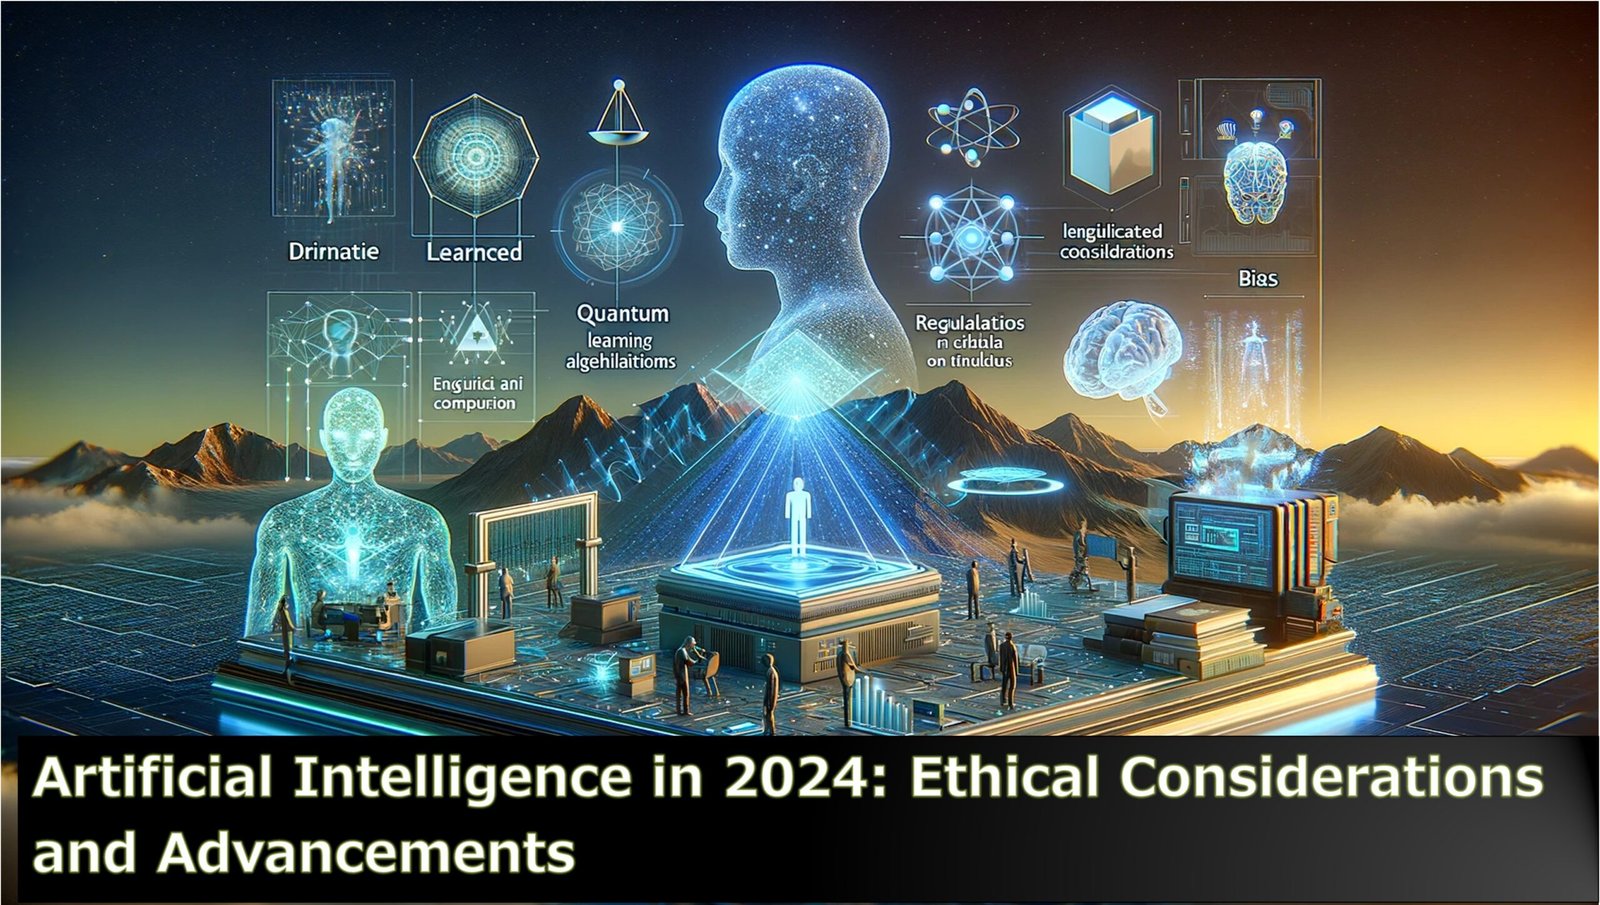 Artificial Intelligence in 2024: Ethical Considerations and Advancements